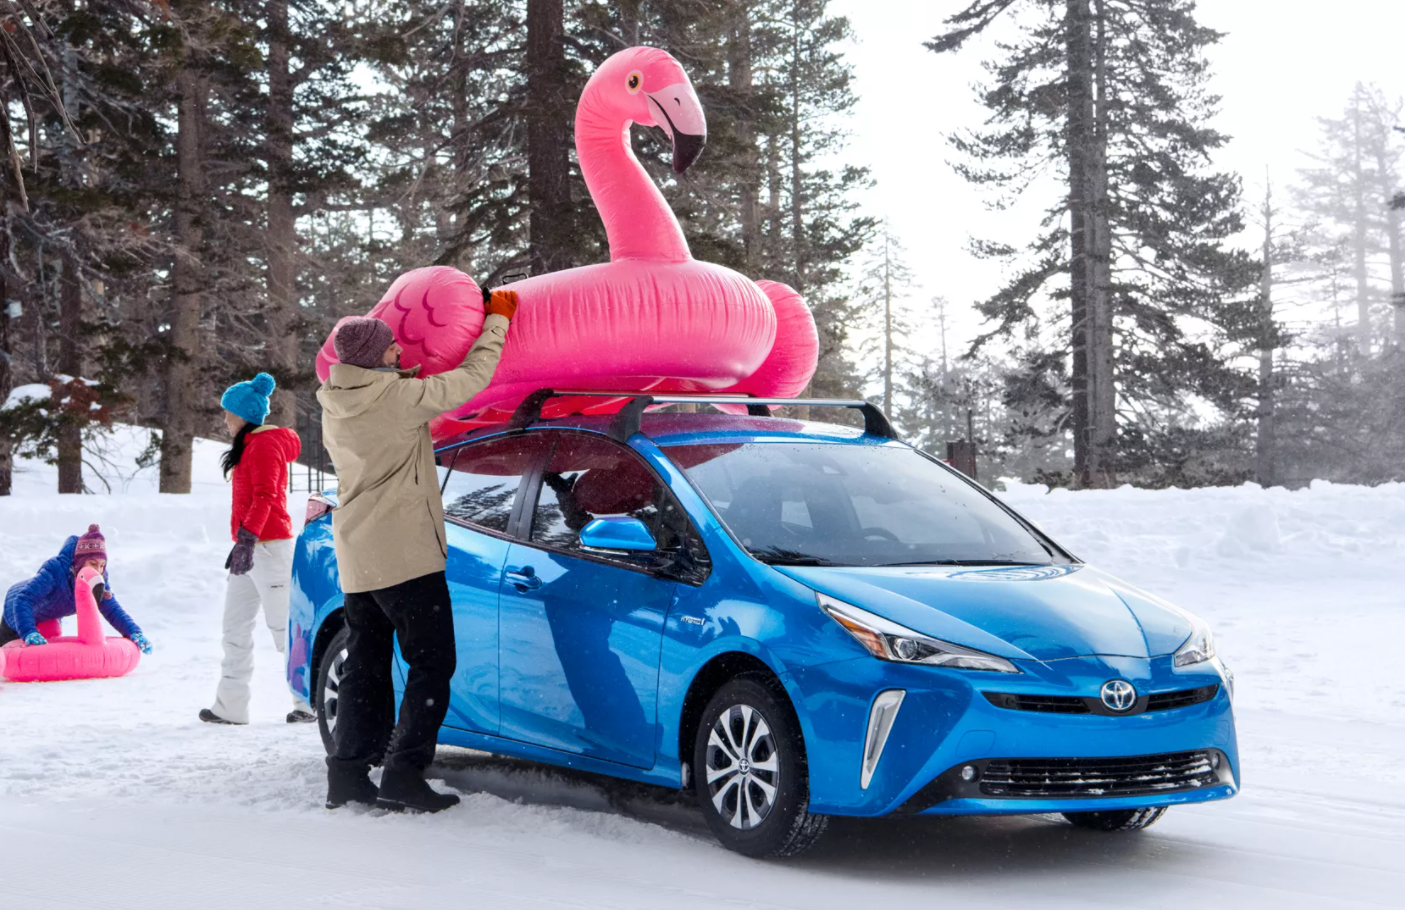 Woman placing a pink inflatable on a 2022 Toyota Prius